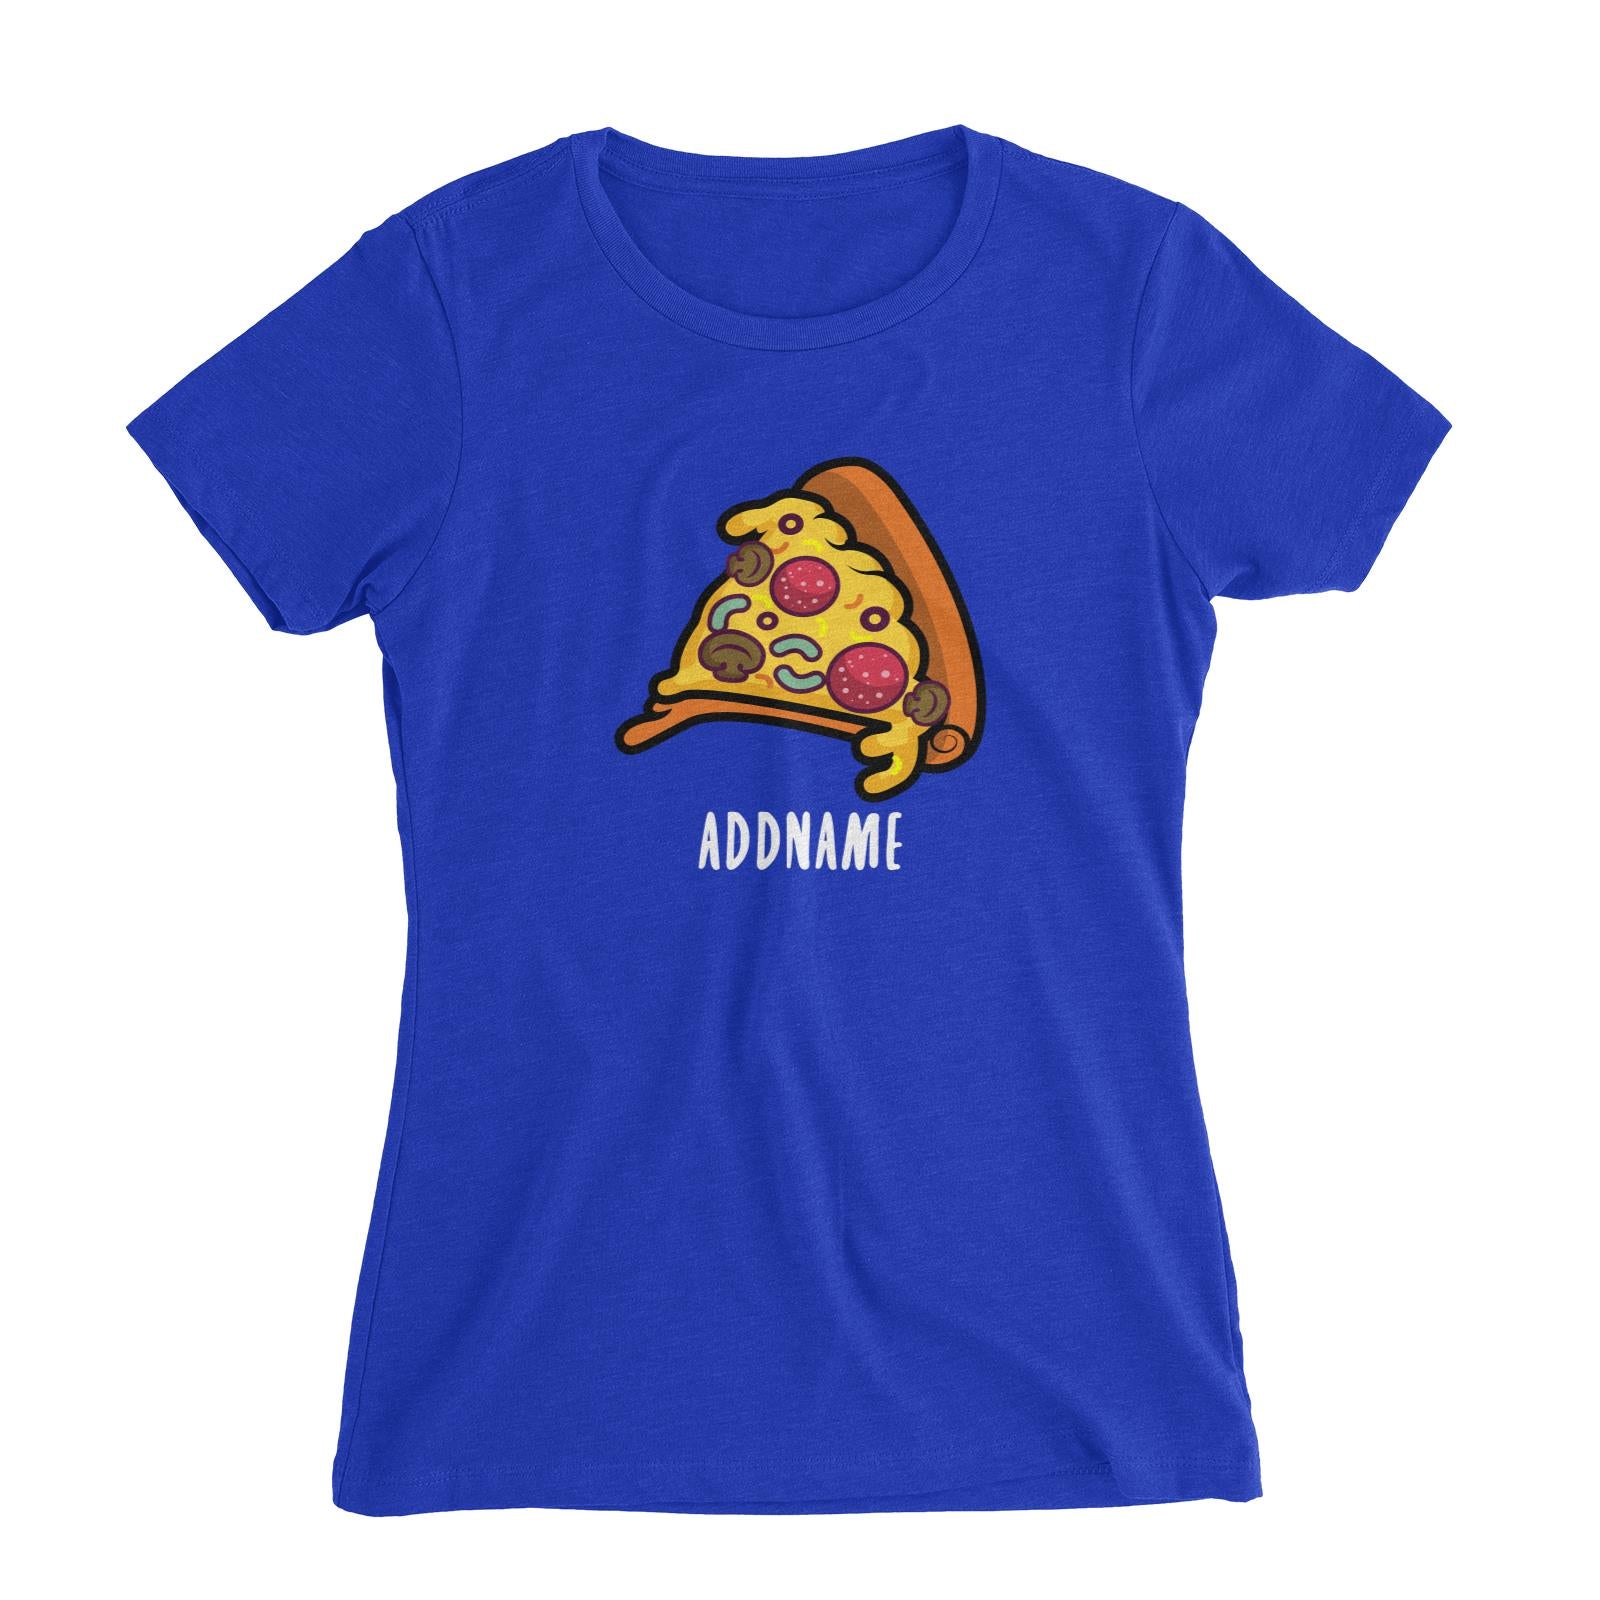 Fast Food Pizza Slice Addname Women's Slim Fit T-Shirt  Matching Family Comic Cartoon Personalizable Designs